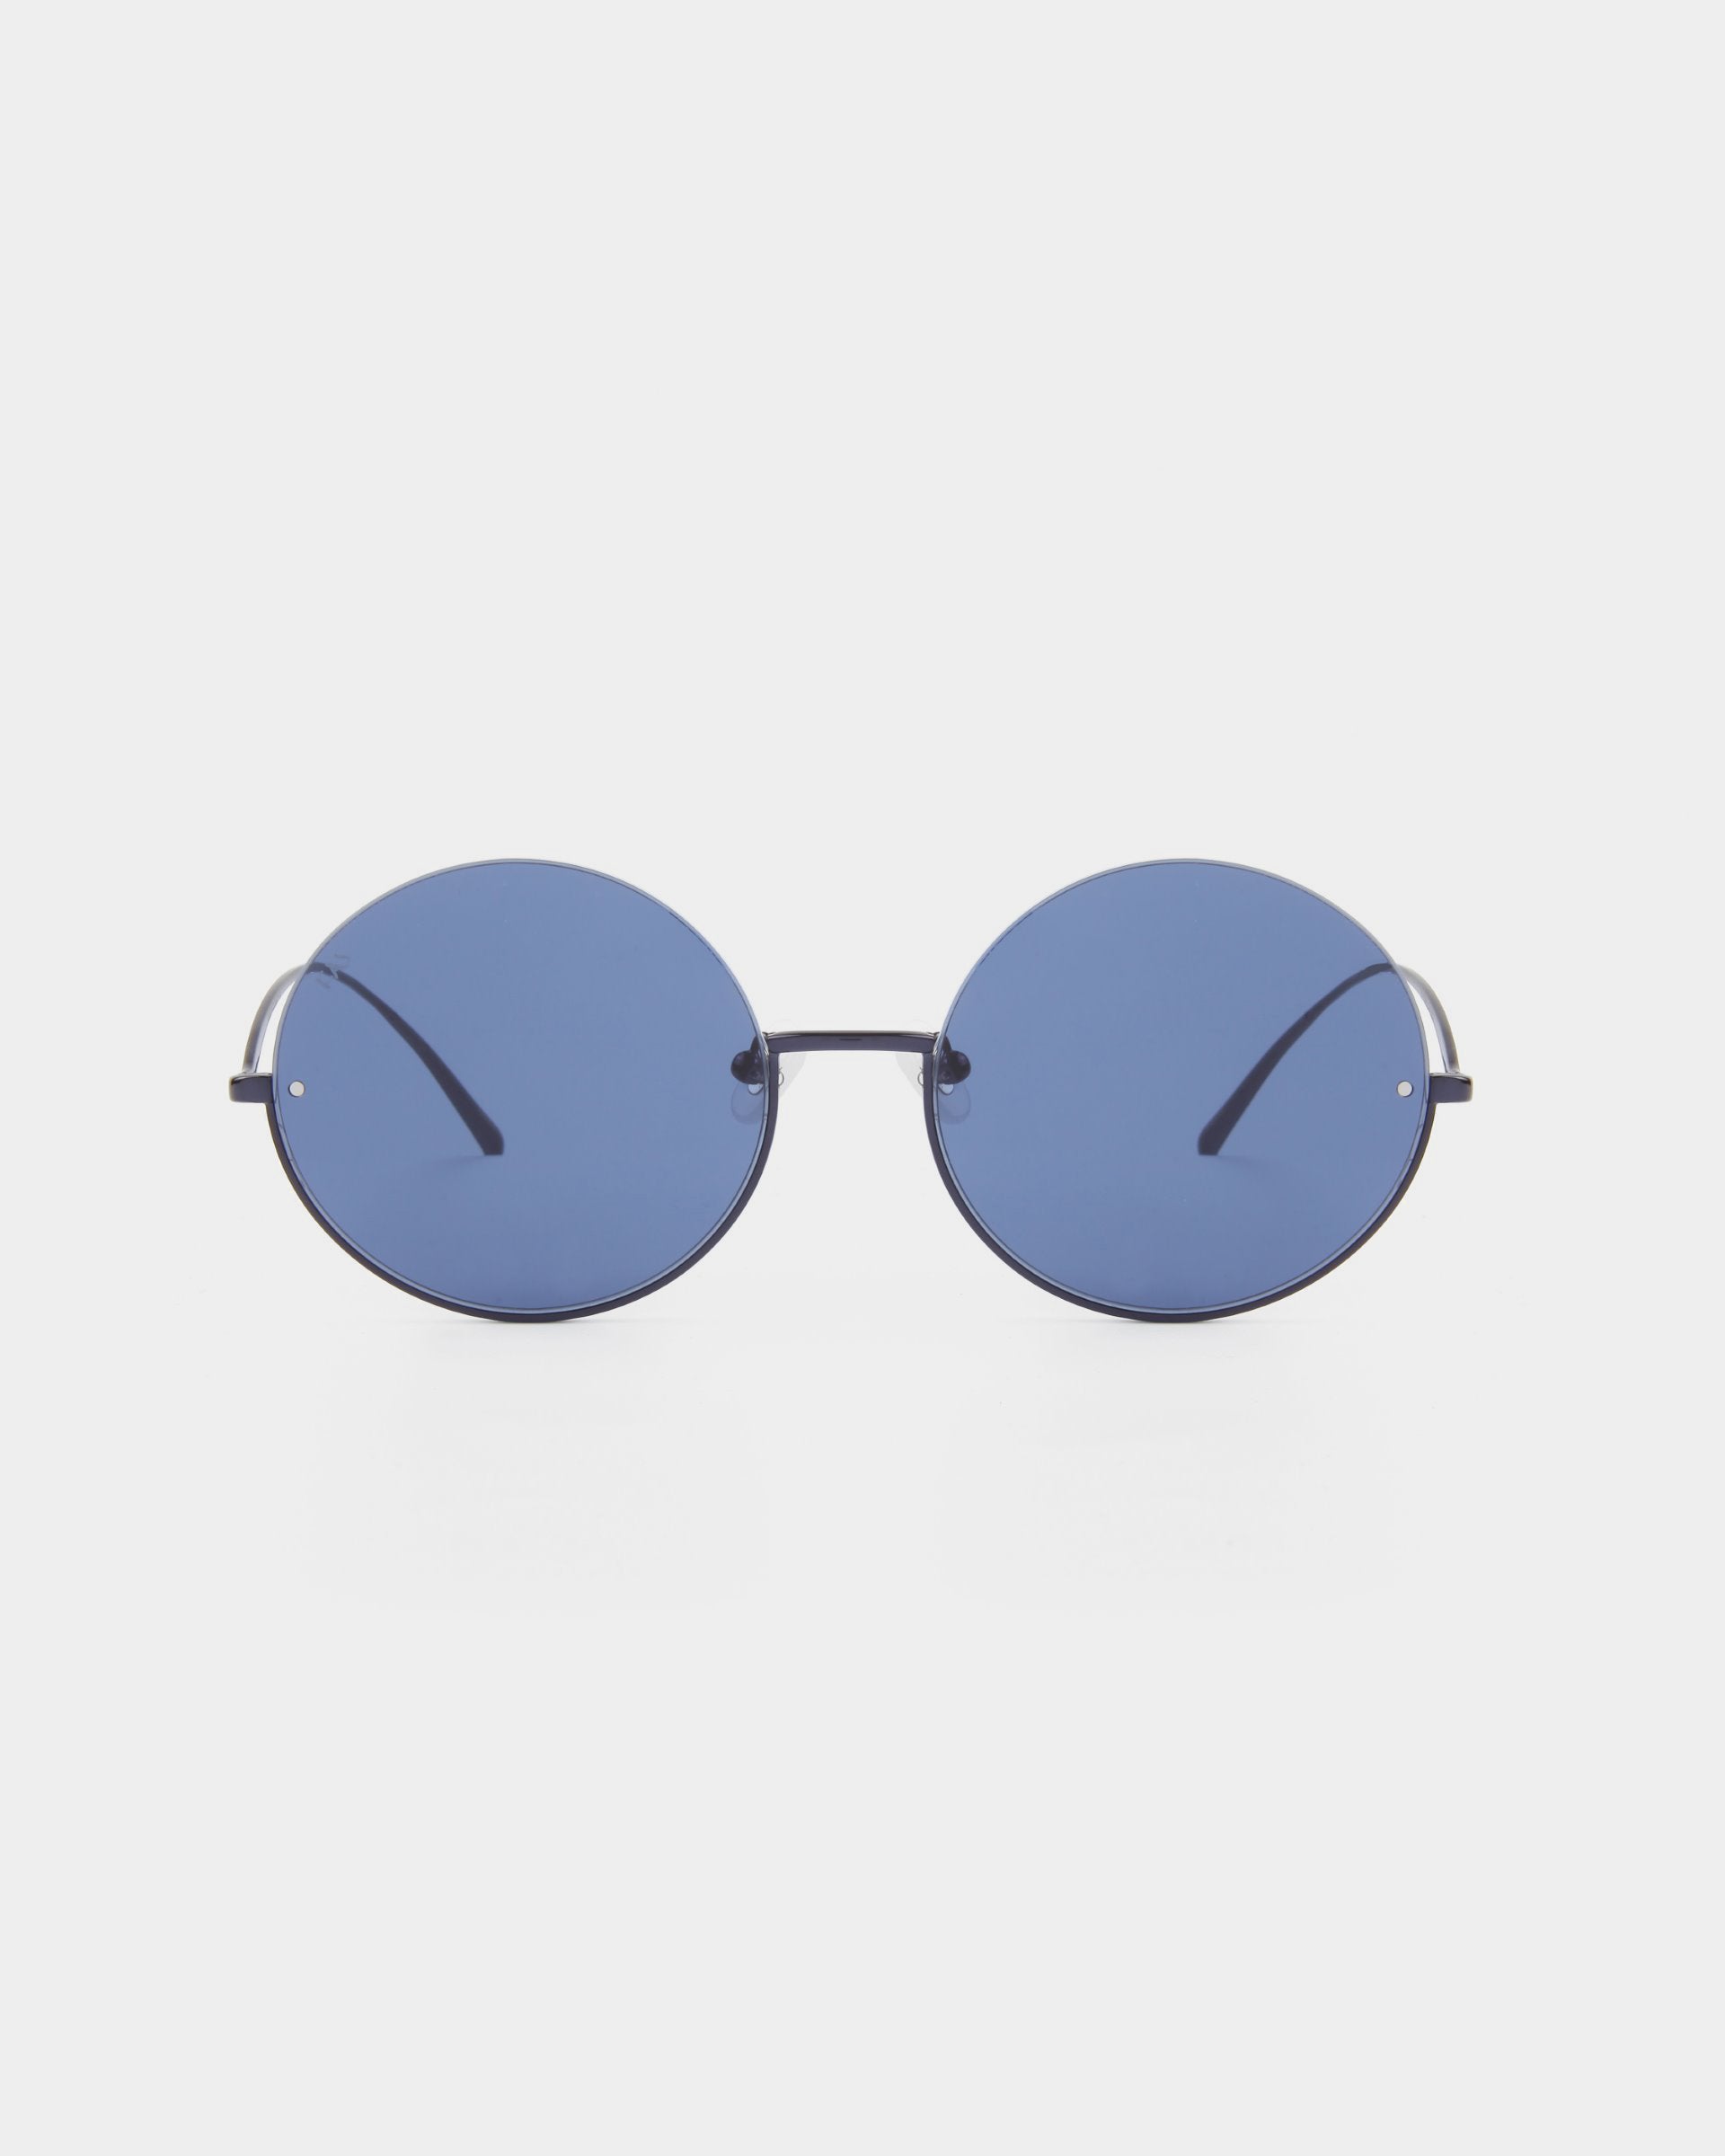 A pair of Oceana sunglasses from For Art's Sake® with dark blue-tinted nylon lenses that are 100% UVA & UVB-protected and thin stainless steel frames. The arms are sleek and minimalist, blending seamlessly with the modern design of the eyewear. The background is plain white.